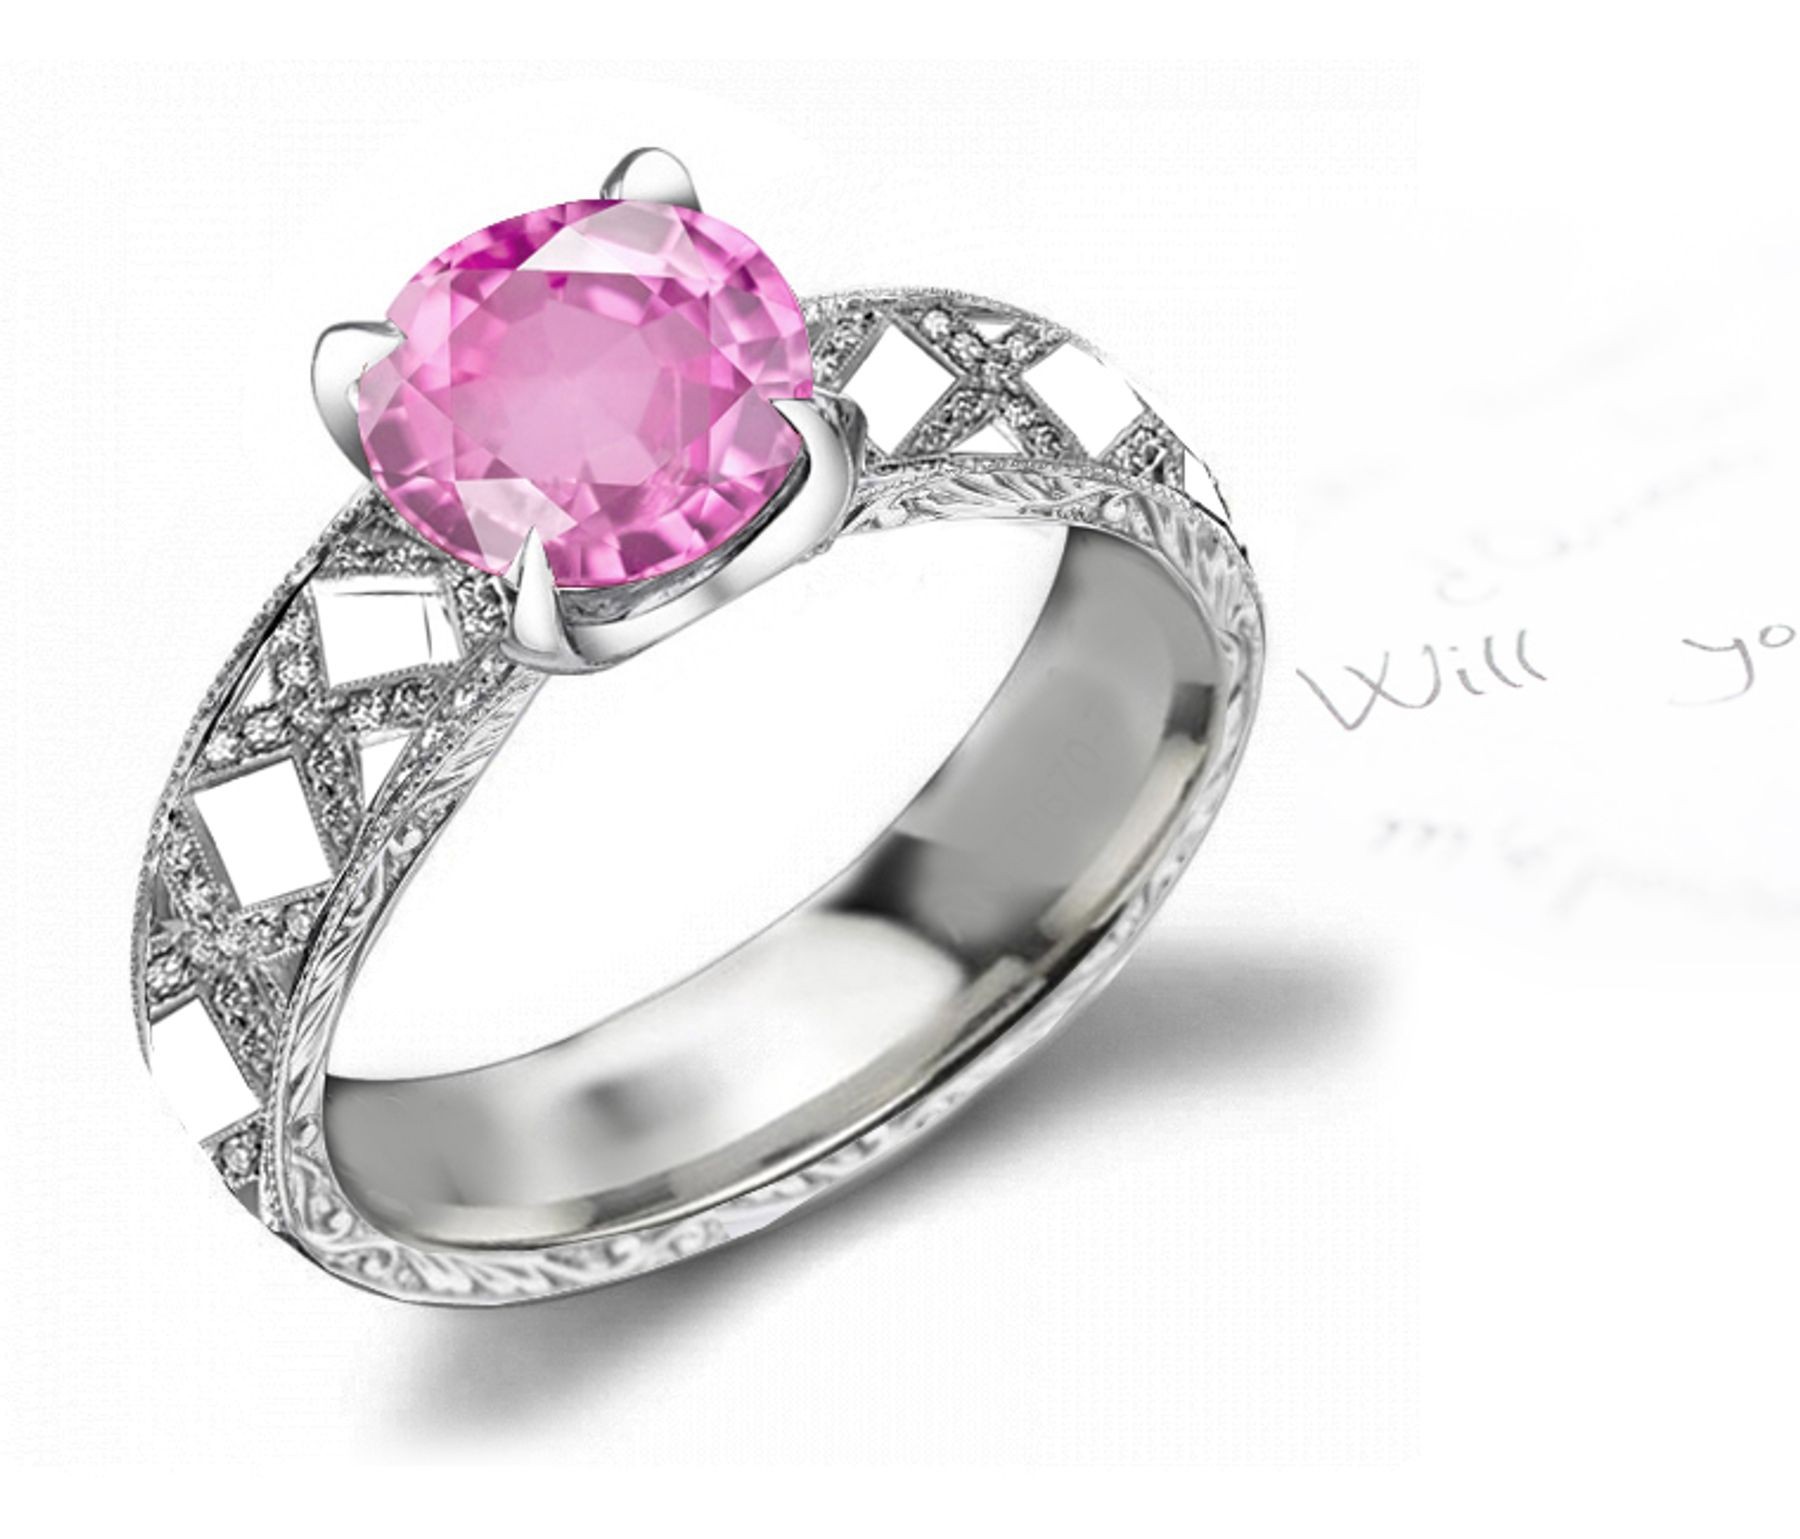 Gold Shank with Star Pattern Pink Fine Sapphire & White Diamond Ring